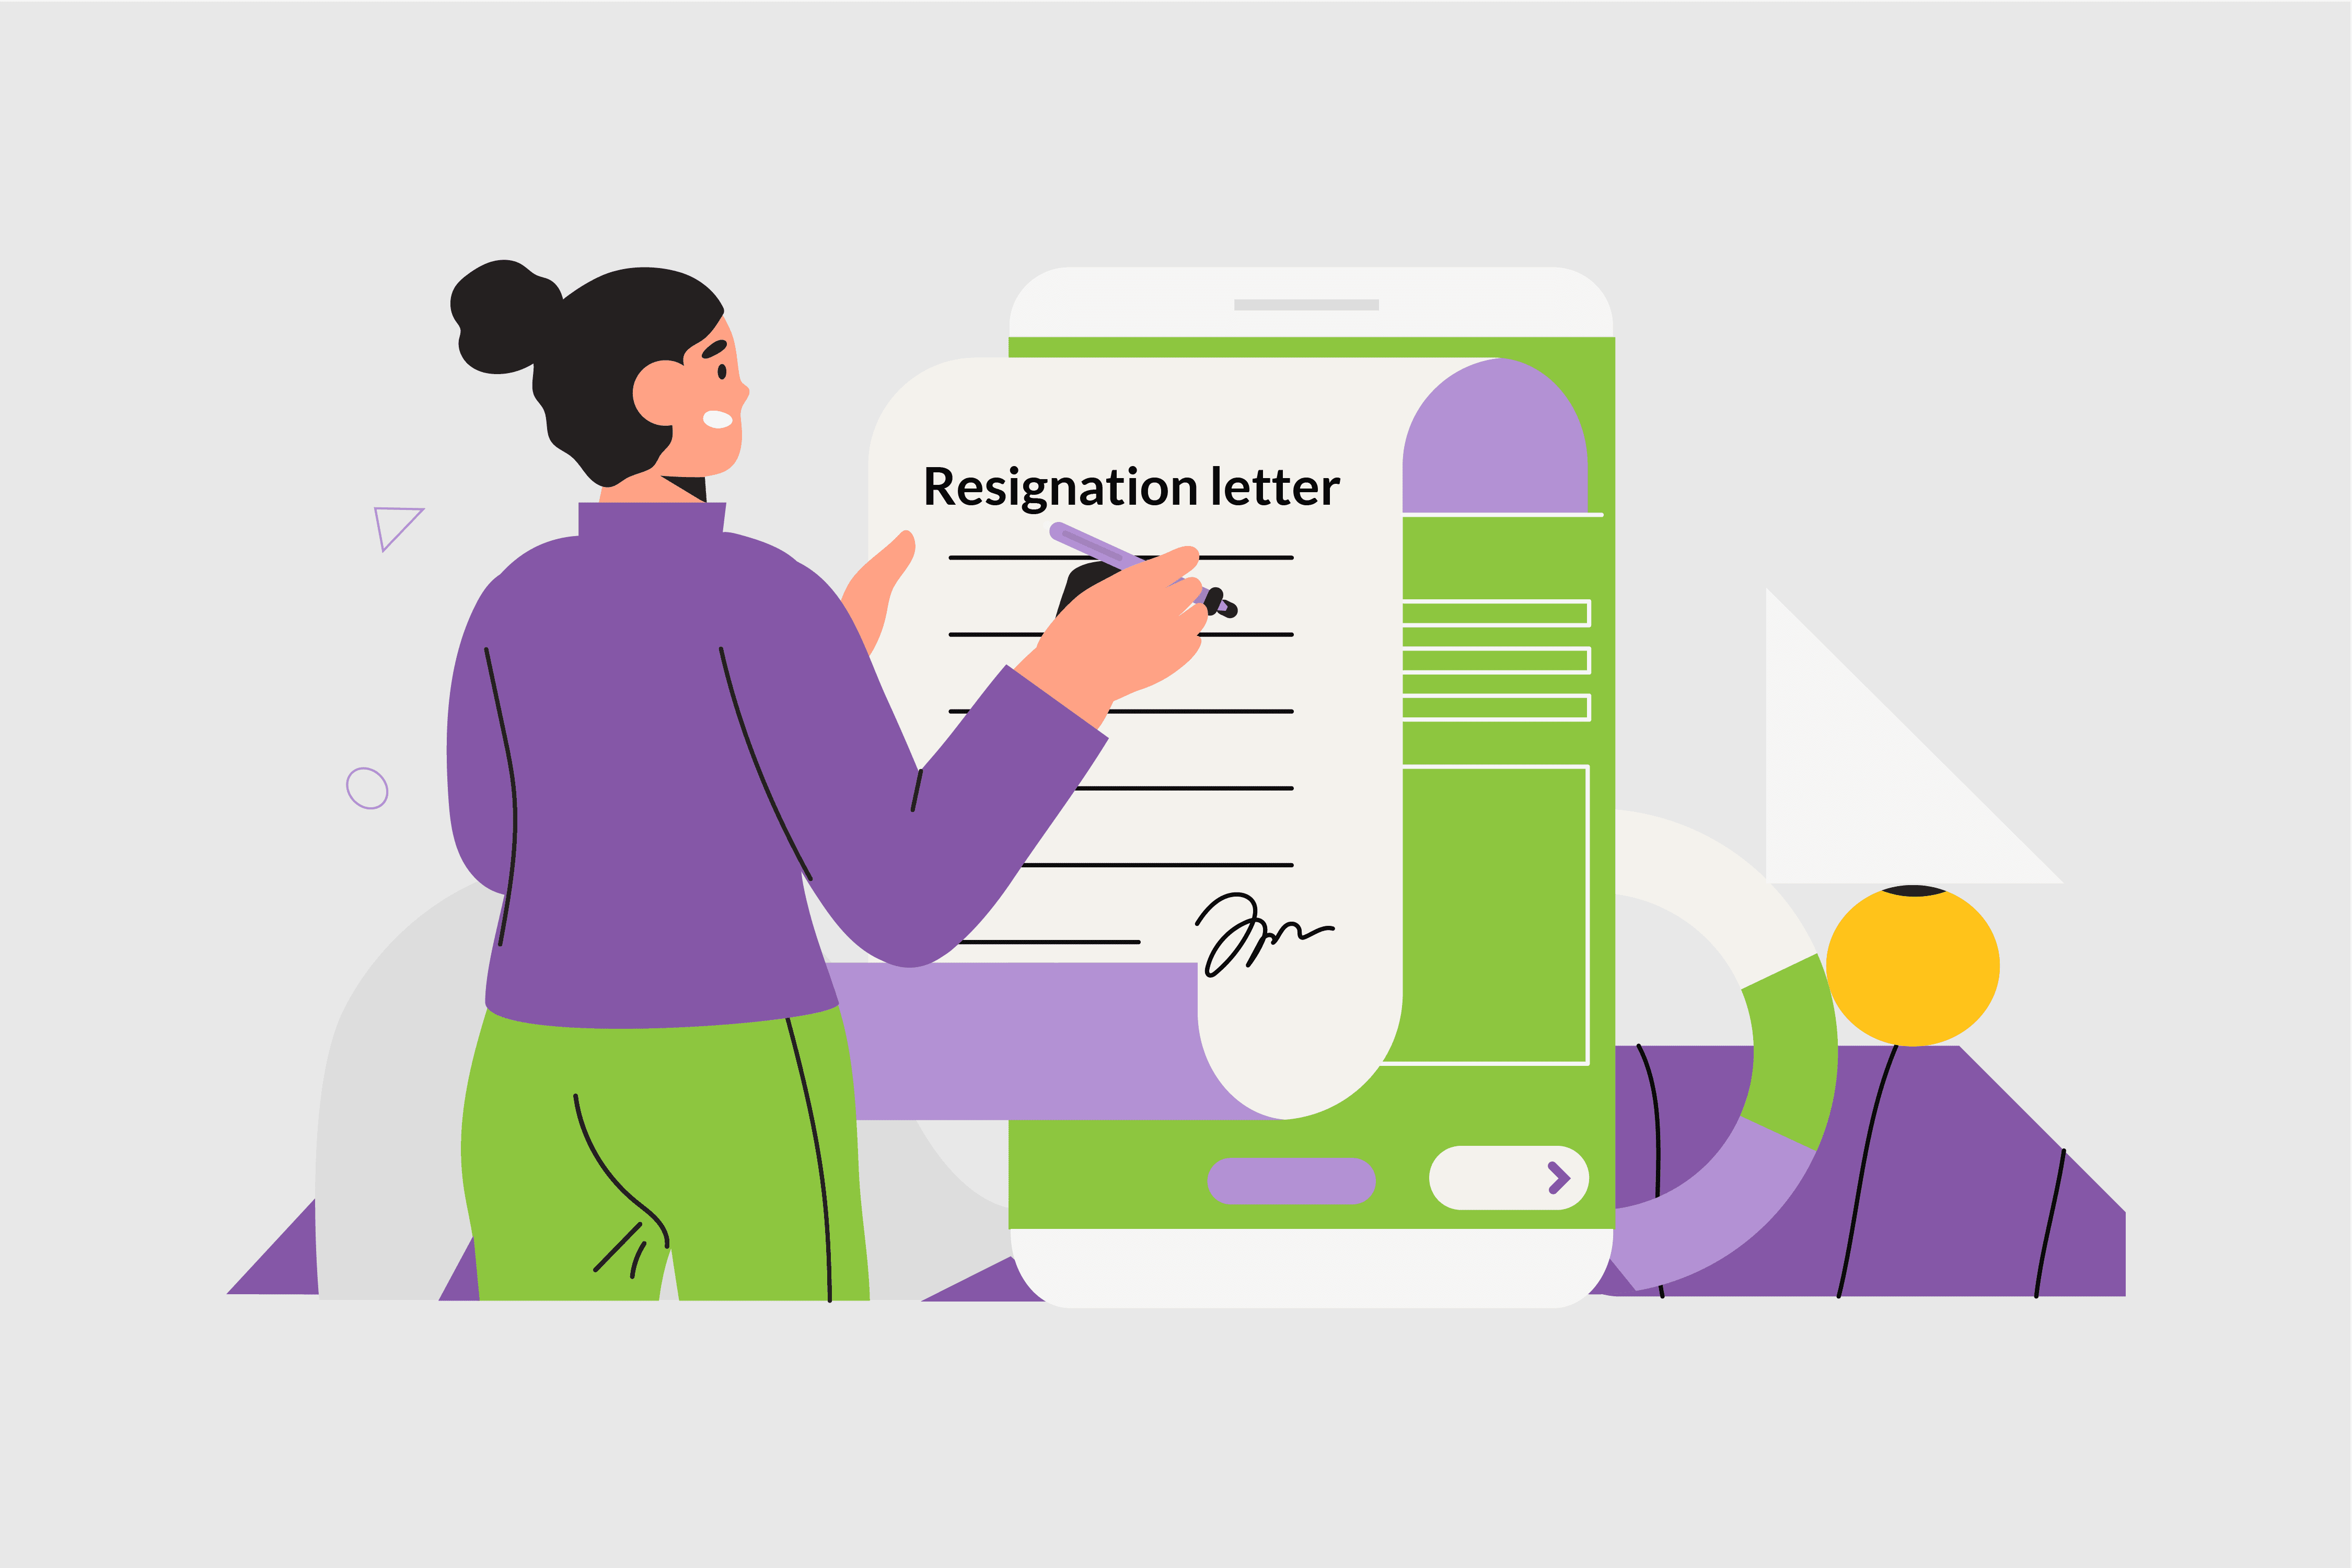 Resignation Letter Templates & Examples: How to Resign From Your Job